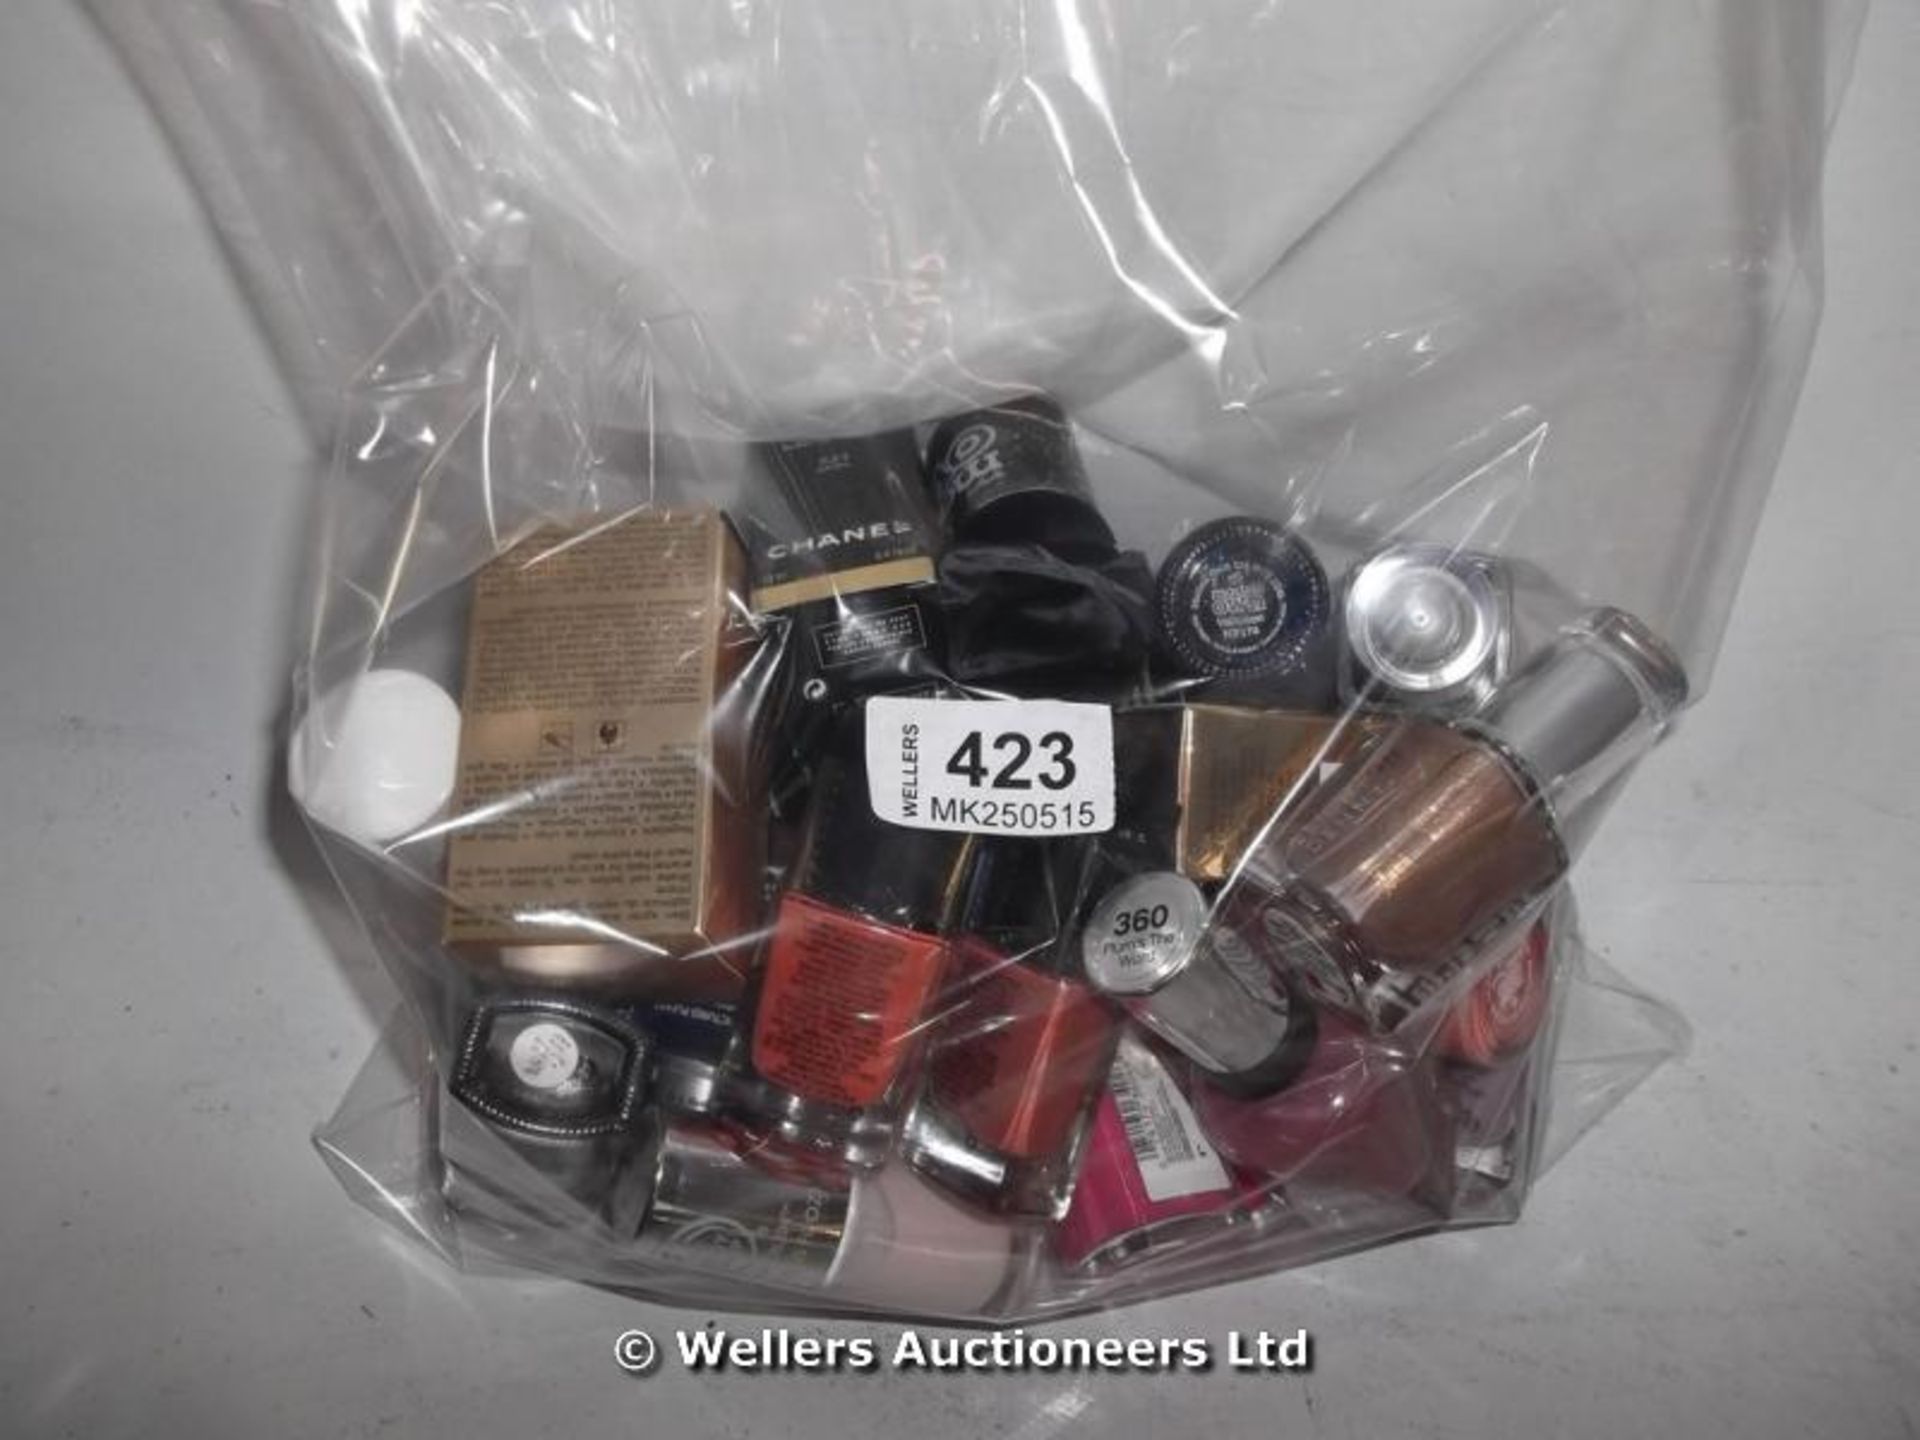 *BAG OF X 25 MIXED NAIL POLISH INC CHANEL/YVESSAINTLAURENT/NO7 / GRADE: UNCLAIMED PROPERTY / UNBOXED